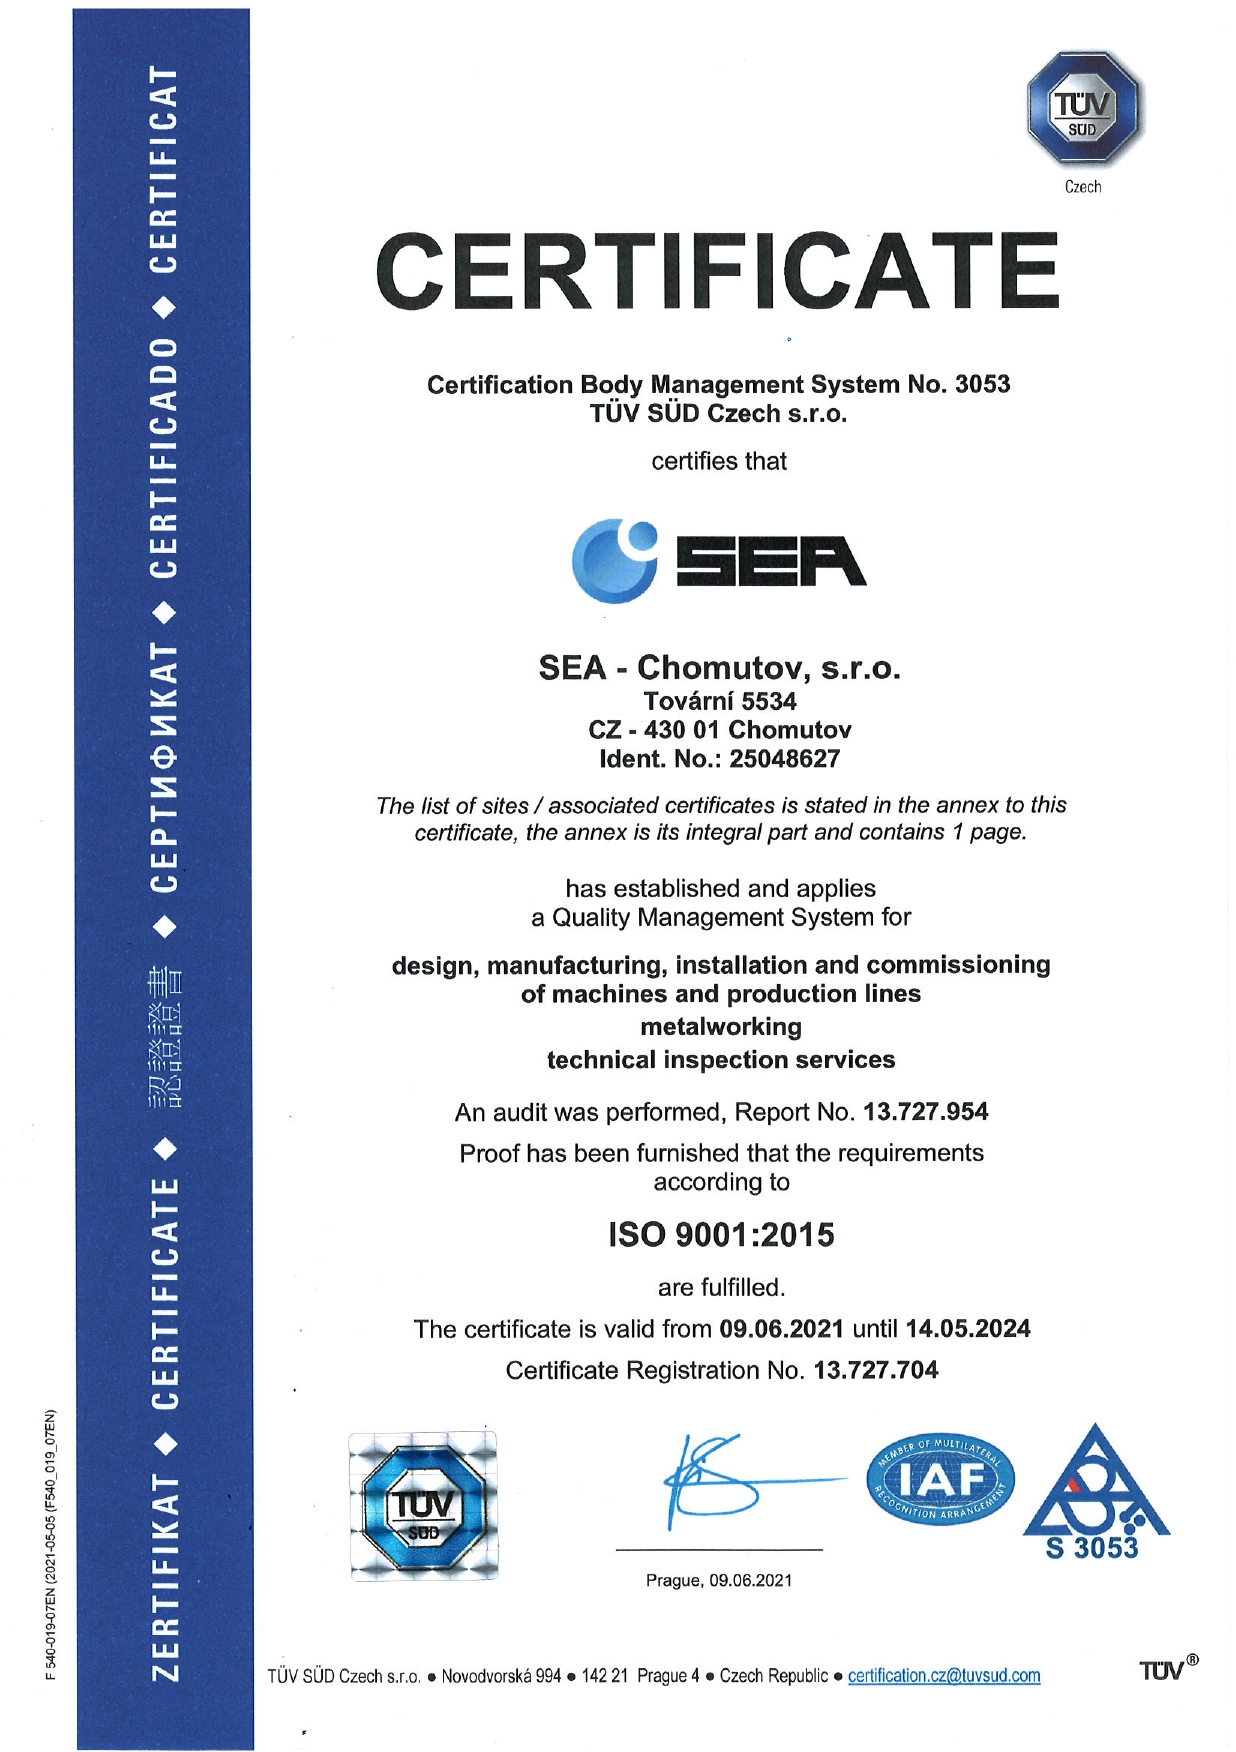 Certificate of quality management system according to EN ISO 9001:2015